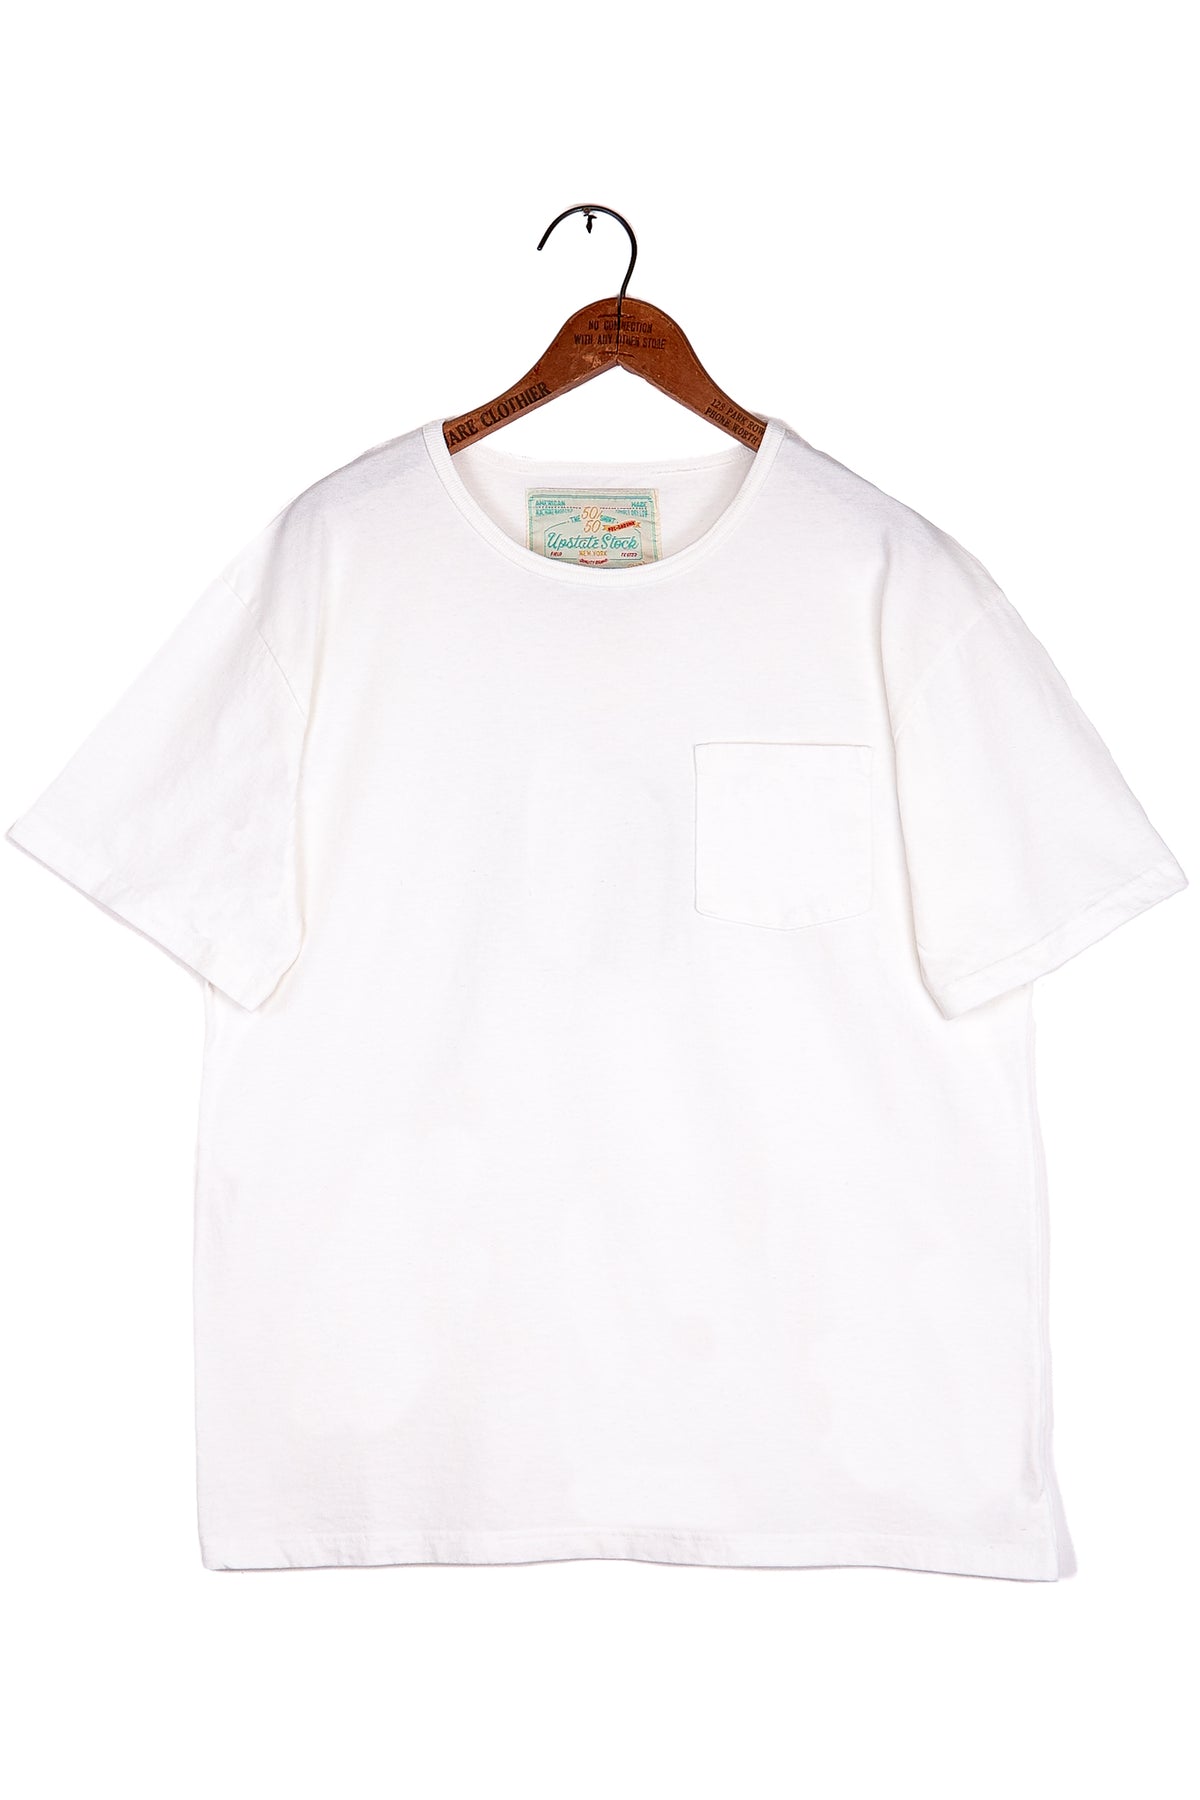 The 50/50 Shirt - POCKET TEE - Bleached White